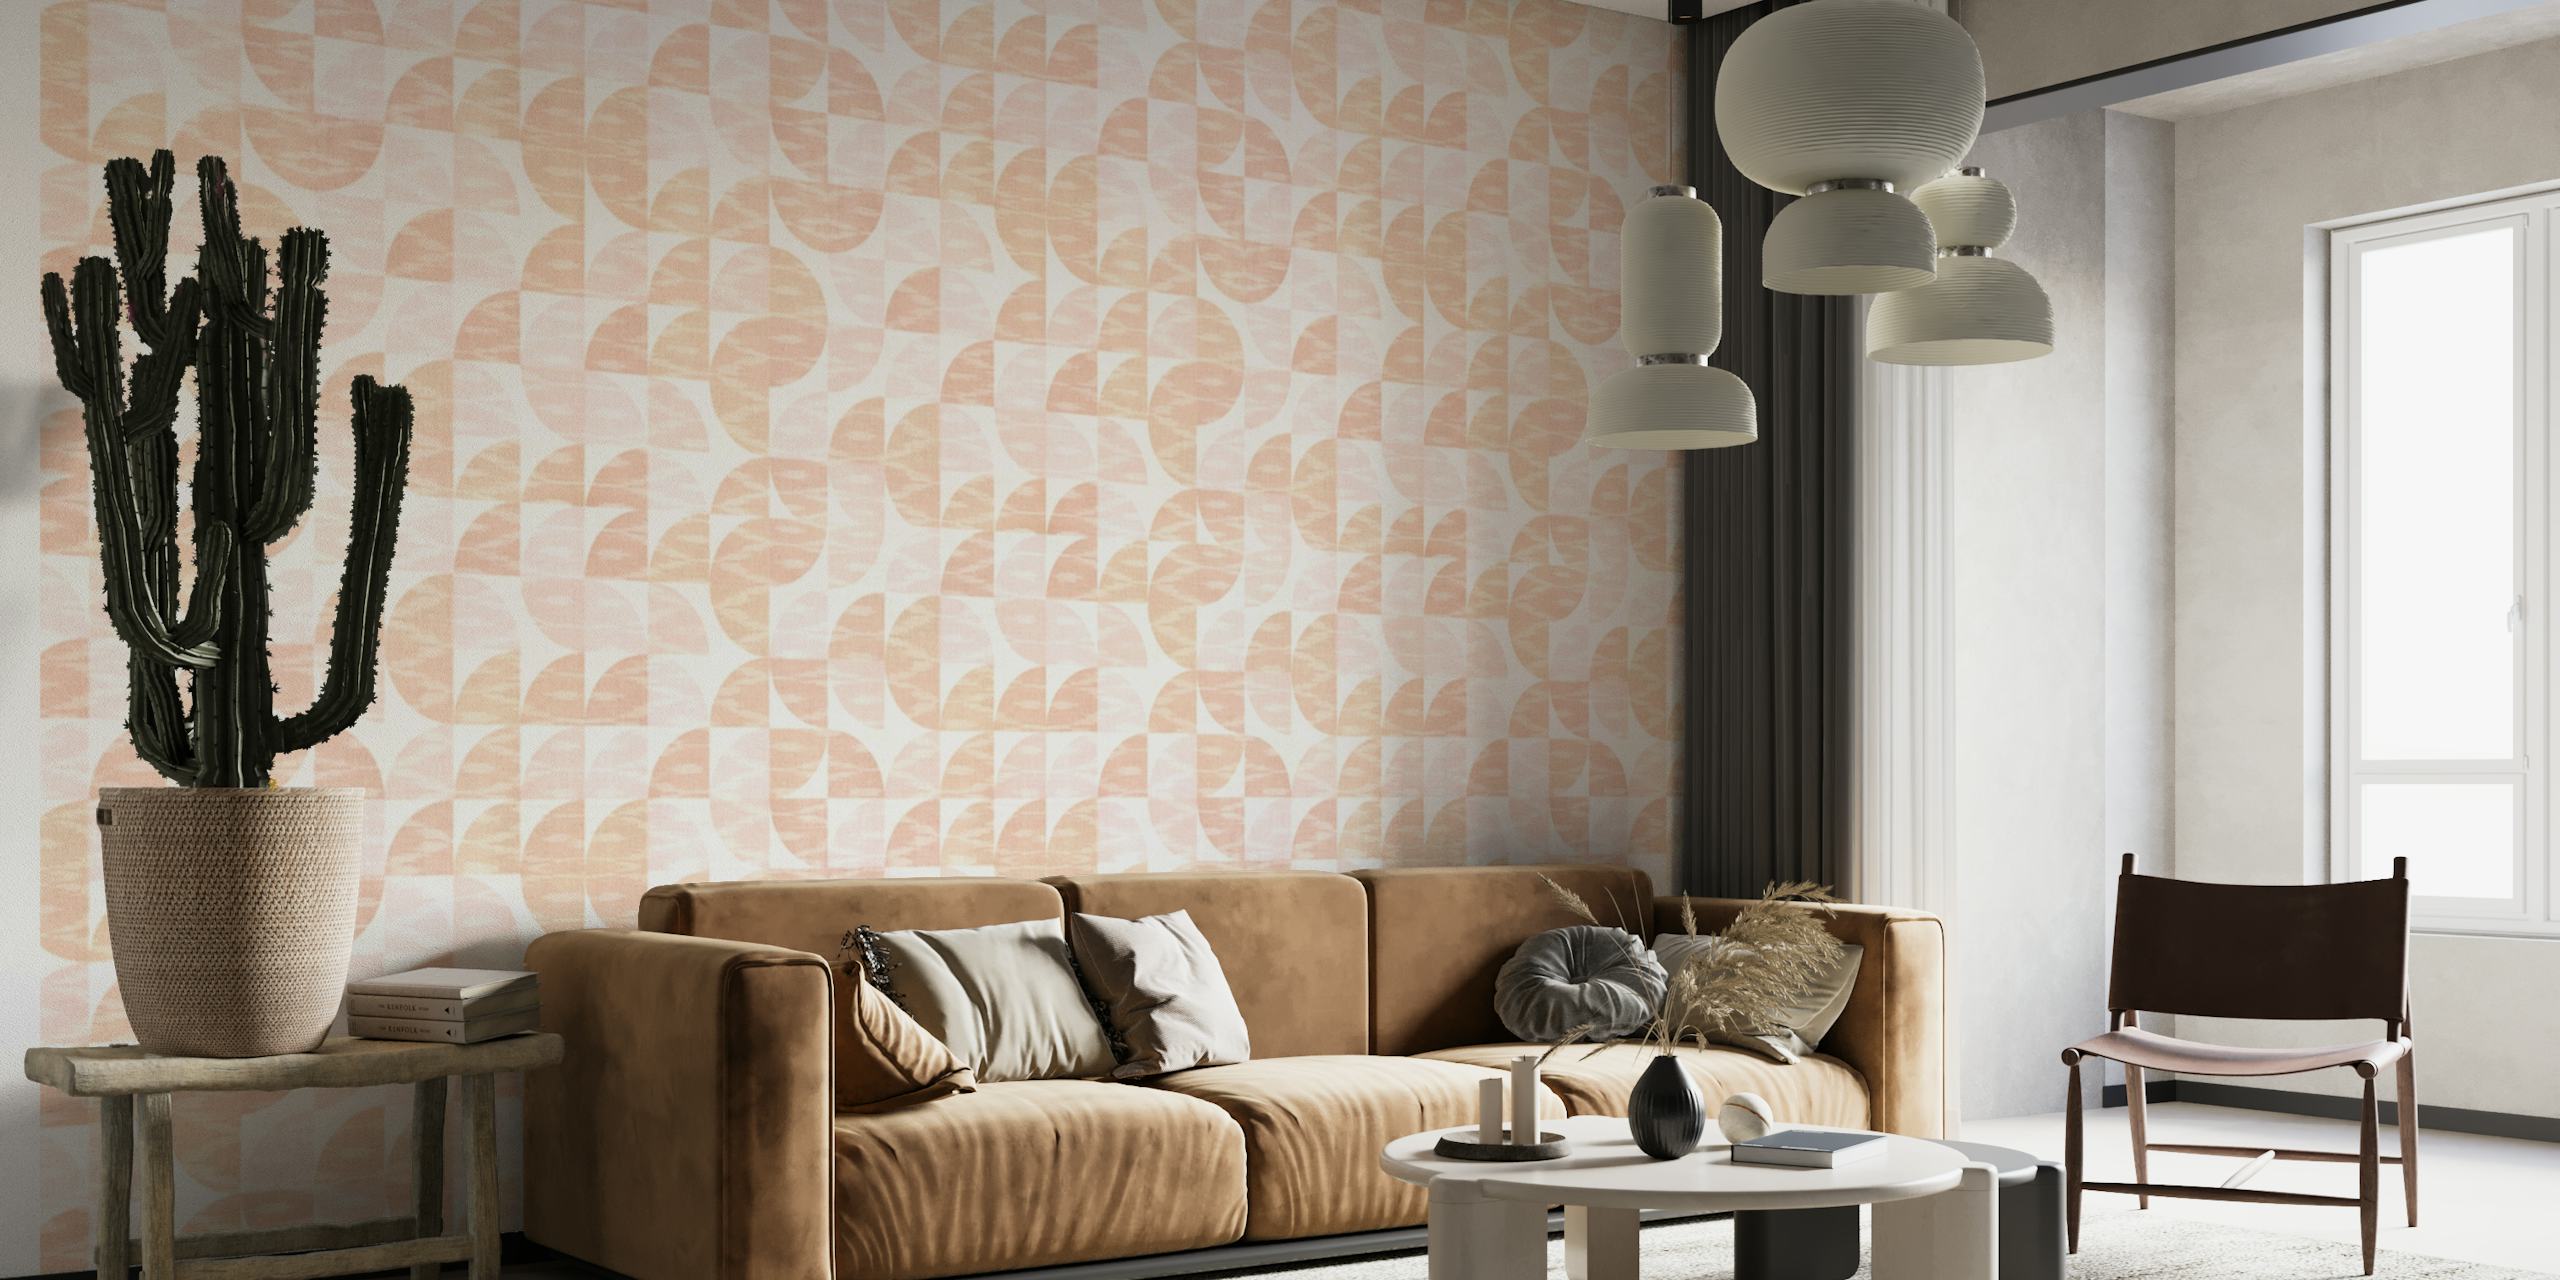 Midcentury abstract geometric peach-colored wall mural